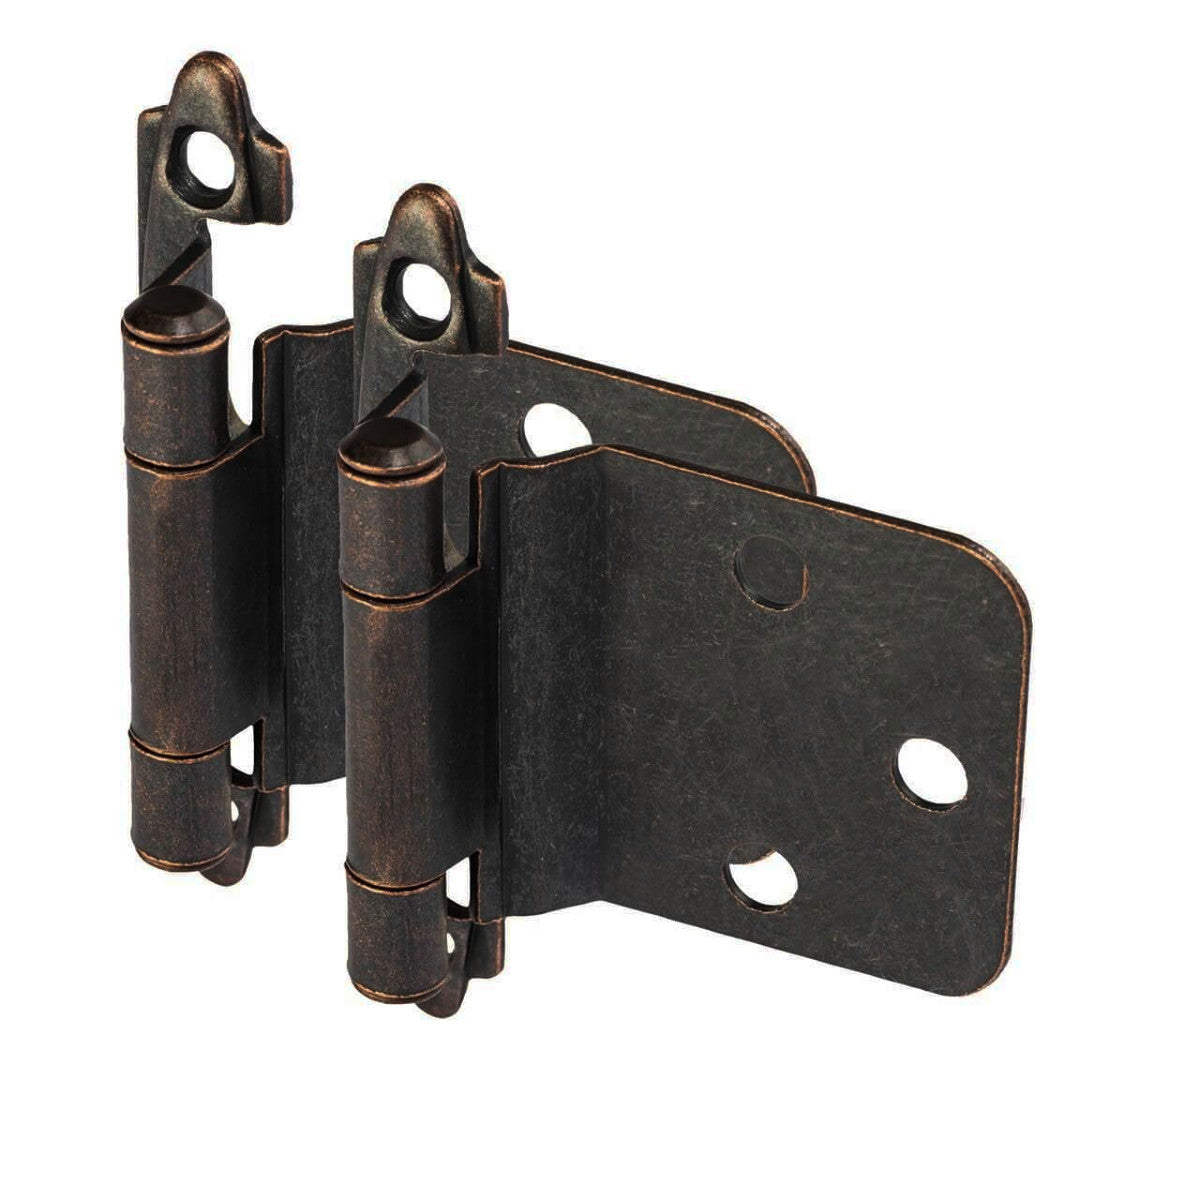 Cosmas 16890-ORB Oil Rubbed Bronze Hinge Variable Overlay with 30 Degree Reverse Bevel